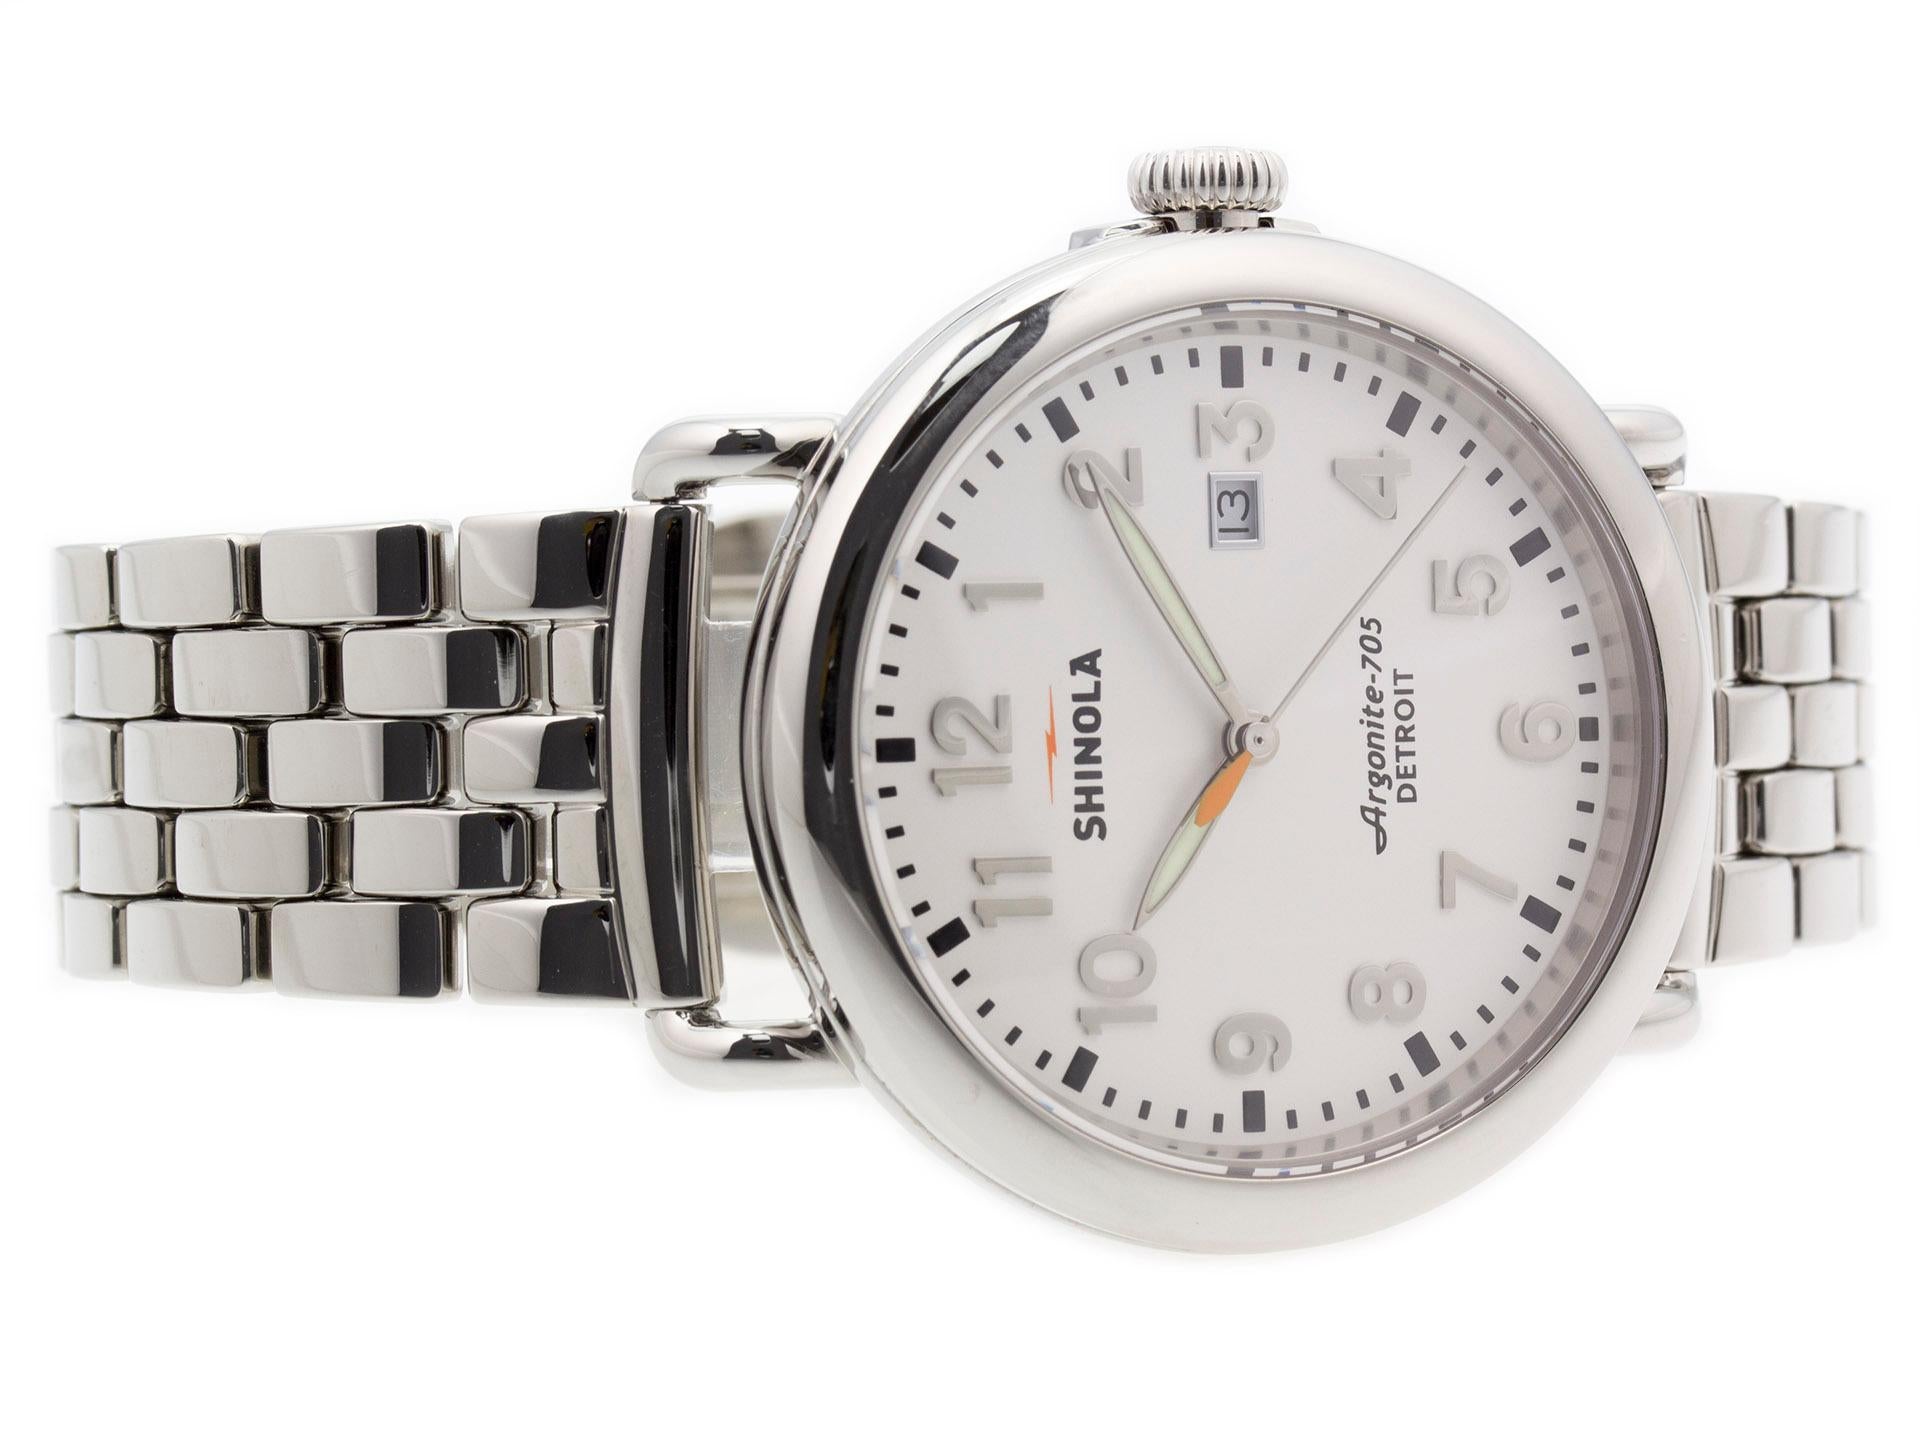 Steel Shinola The Runwell quartz watch with a 41mm case, white dial, and steel bracelet with folding clasp. Features include hours, minutes, seconds, and date. Comes with a Deluxe Gift Box and 2 Year Store Warranty.​

Brand	Shinola
Series	The